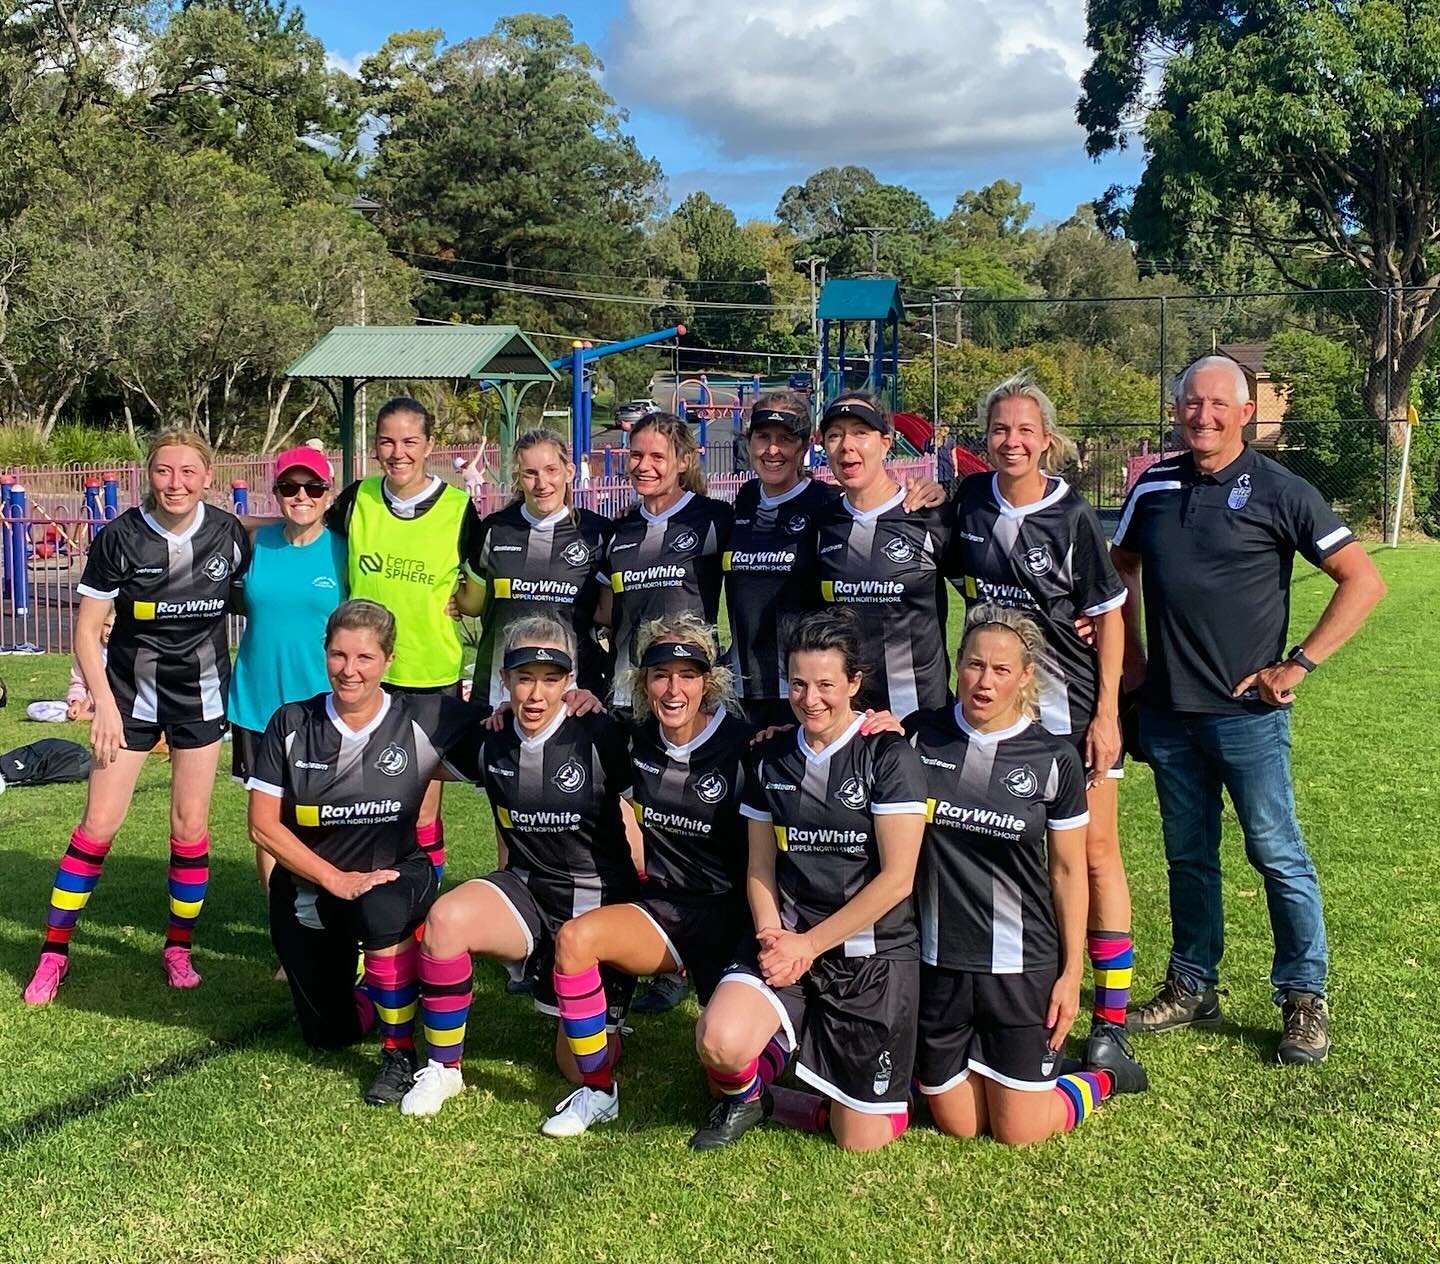 WOMENS OVER 30/3 VS NORTHERN GALAXY

Behold our Sunday Super Women who notched up their first win of the season with an amazing performance against Northern Galaxy away at Foxglove. 

Some brilliant passing with two great goals and a clean sheet defe